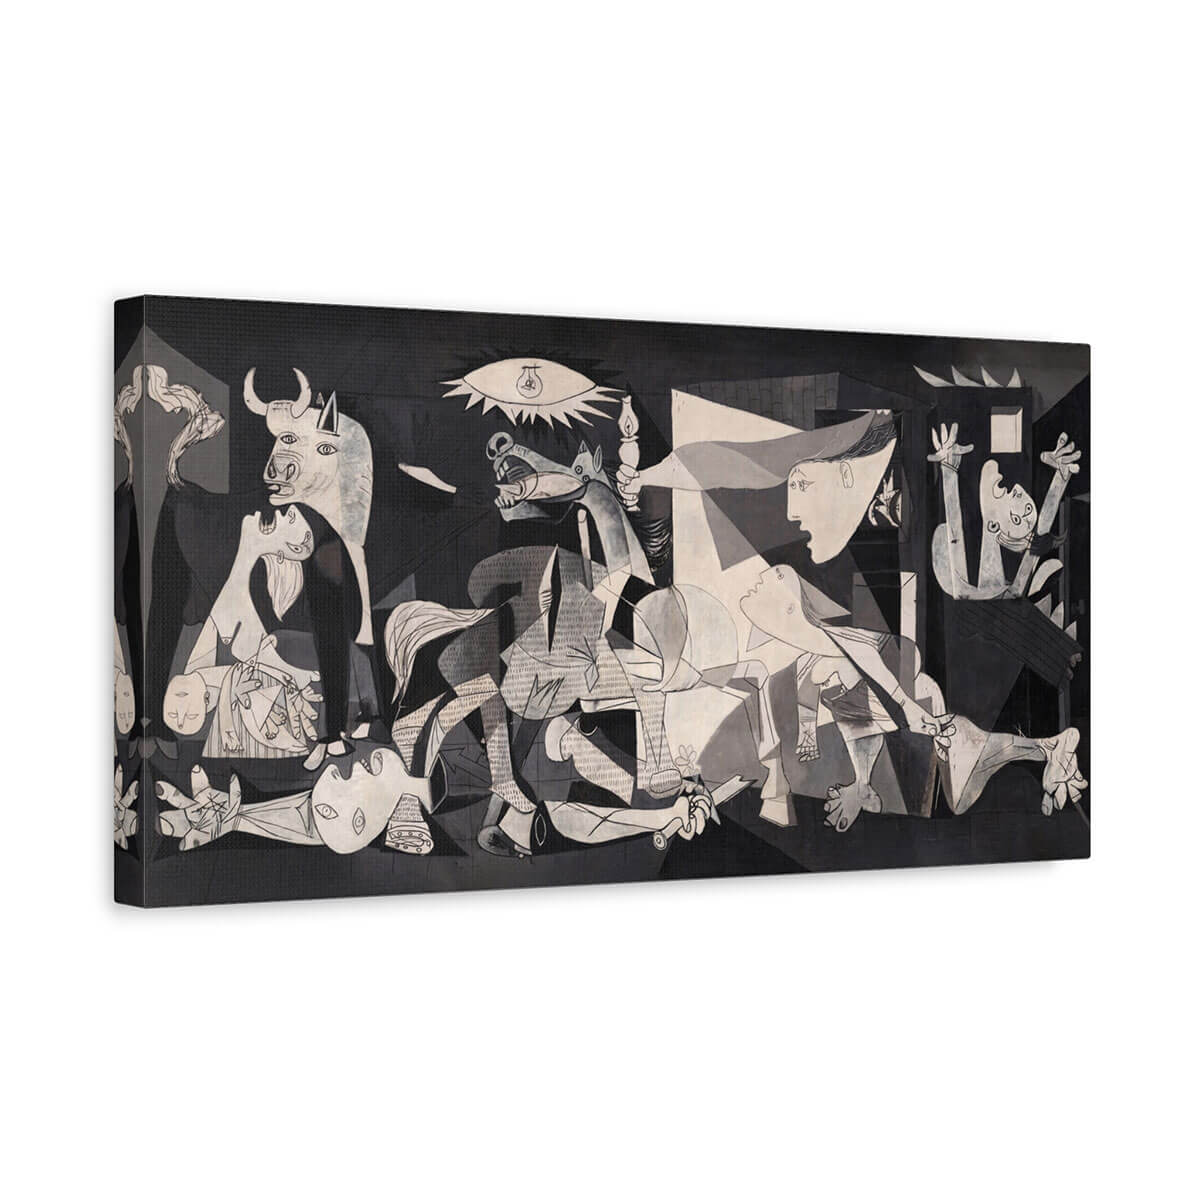 Captivating canvas print inspired by Picasso's Guernica